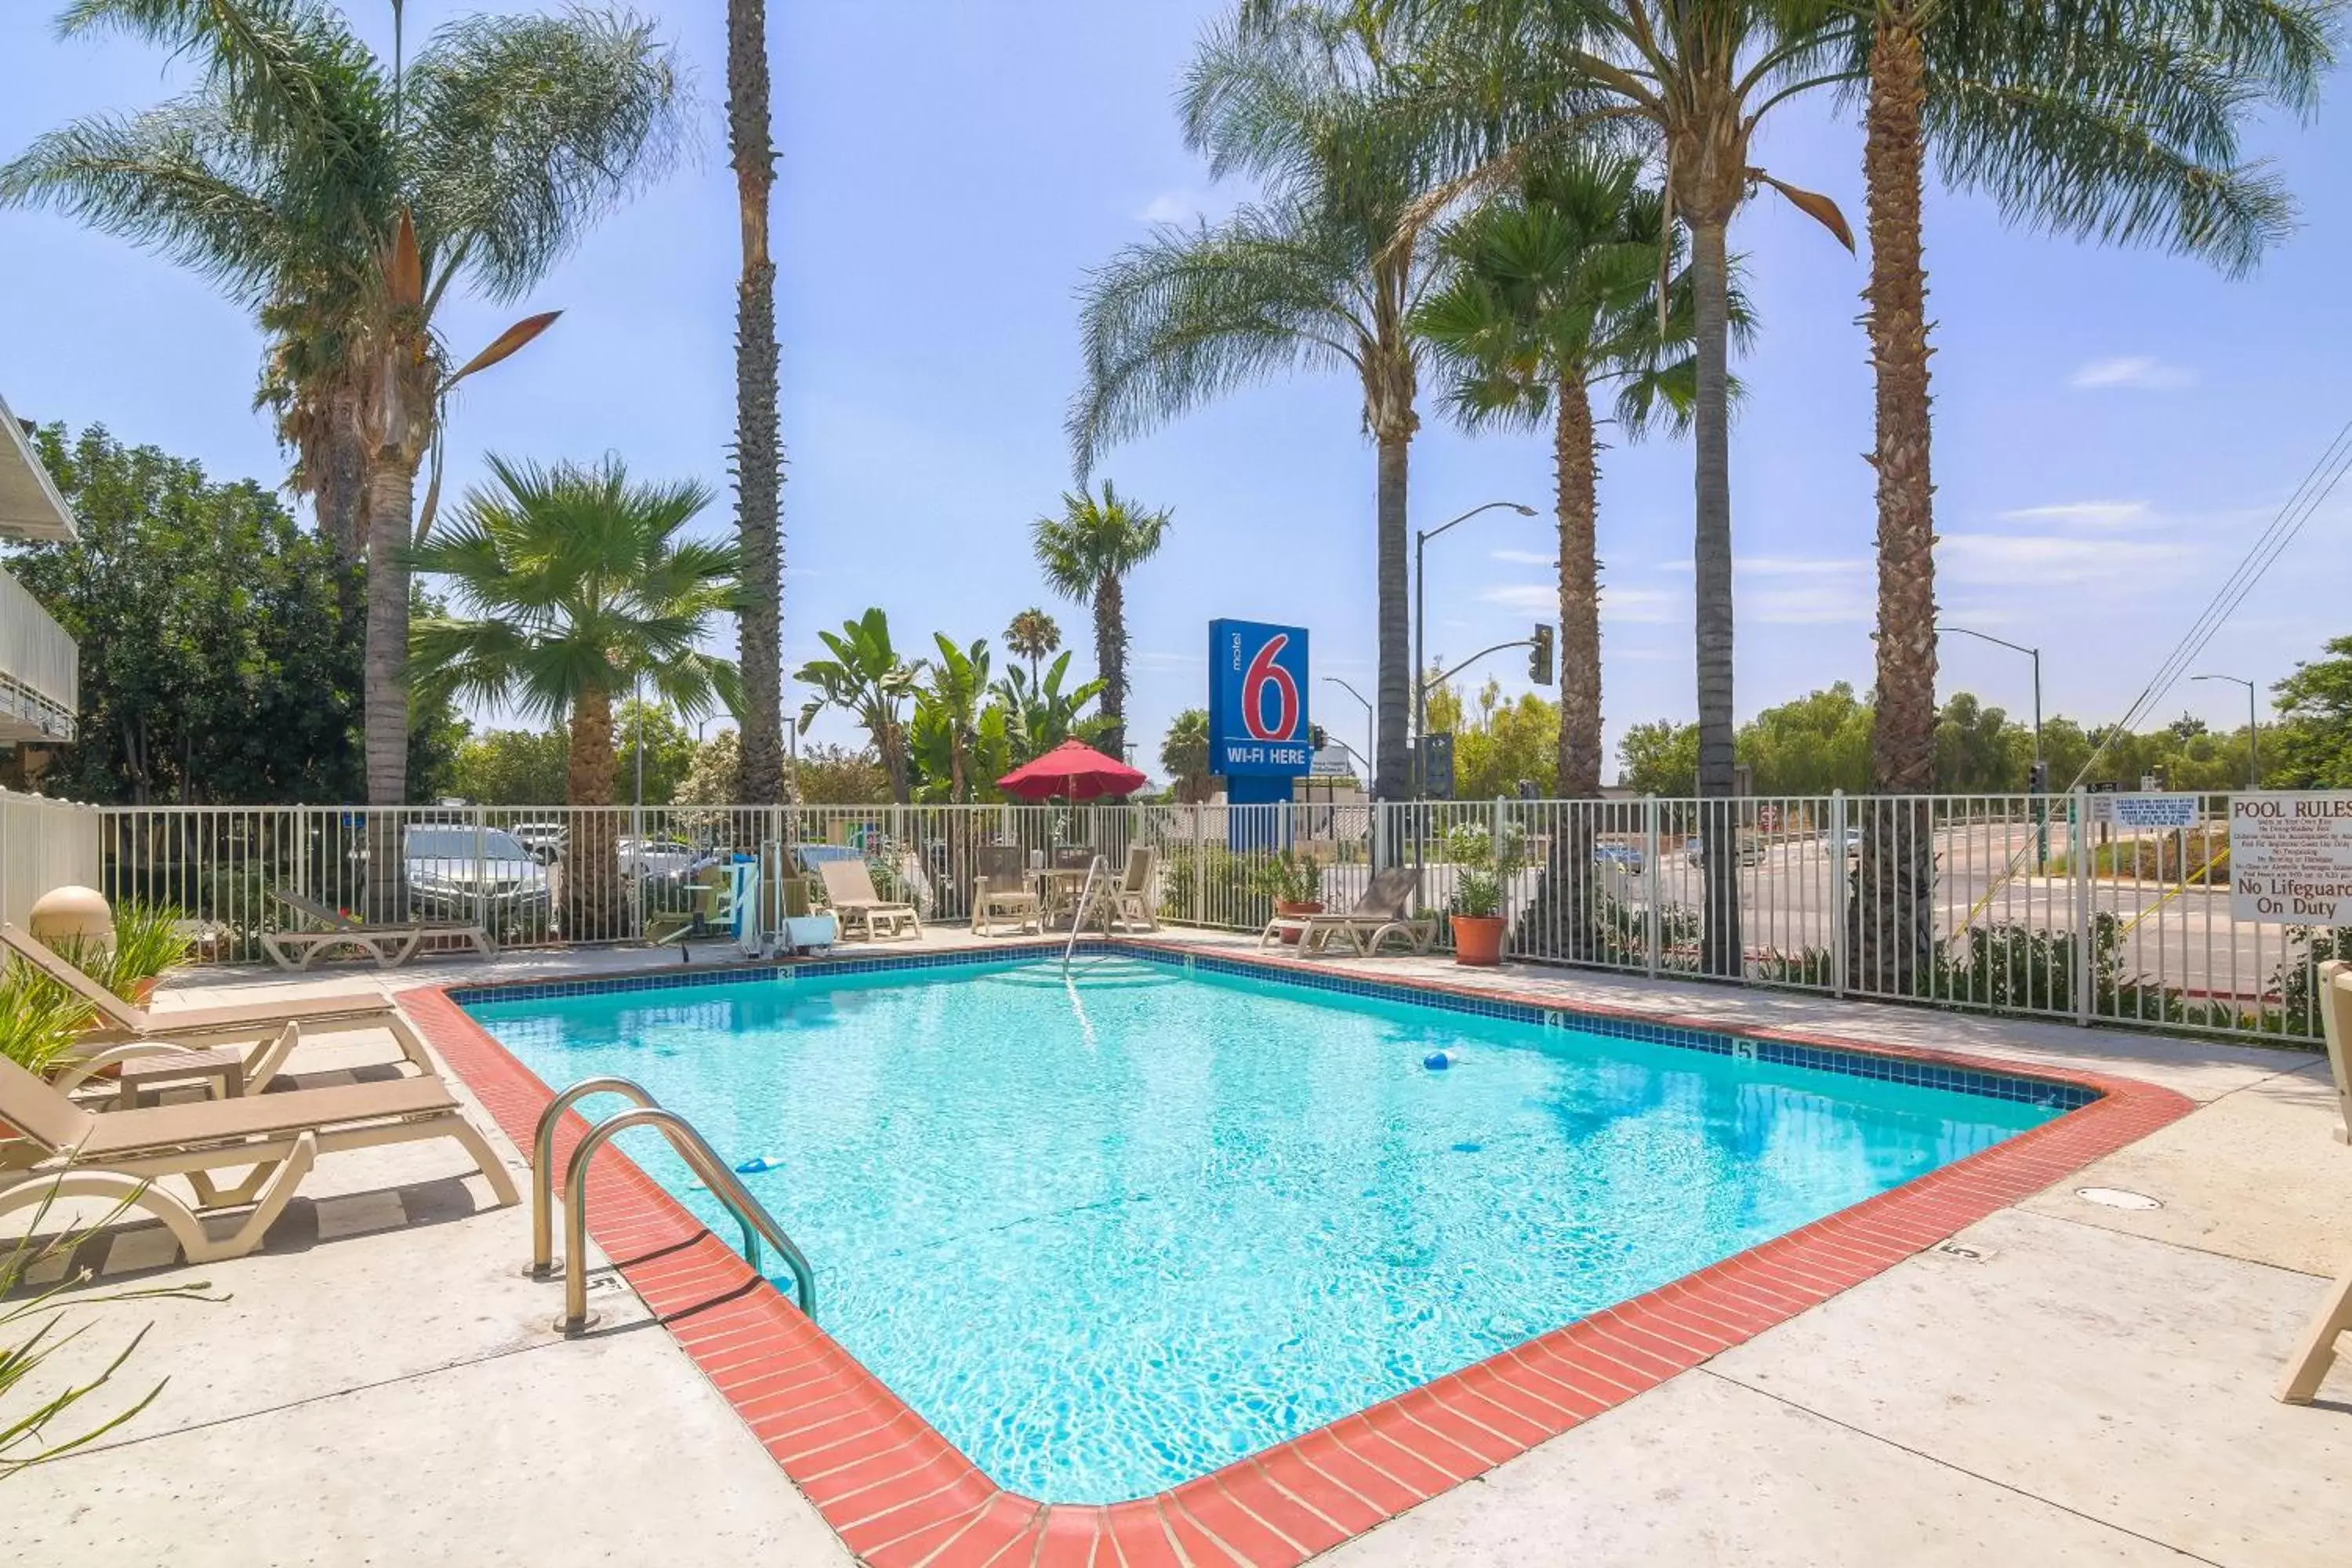 Swimming Pool in Motel 6-Simi Valley, CA